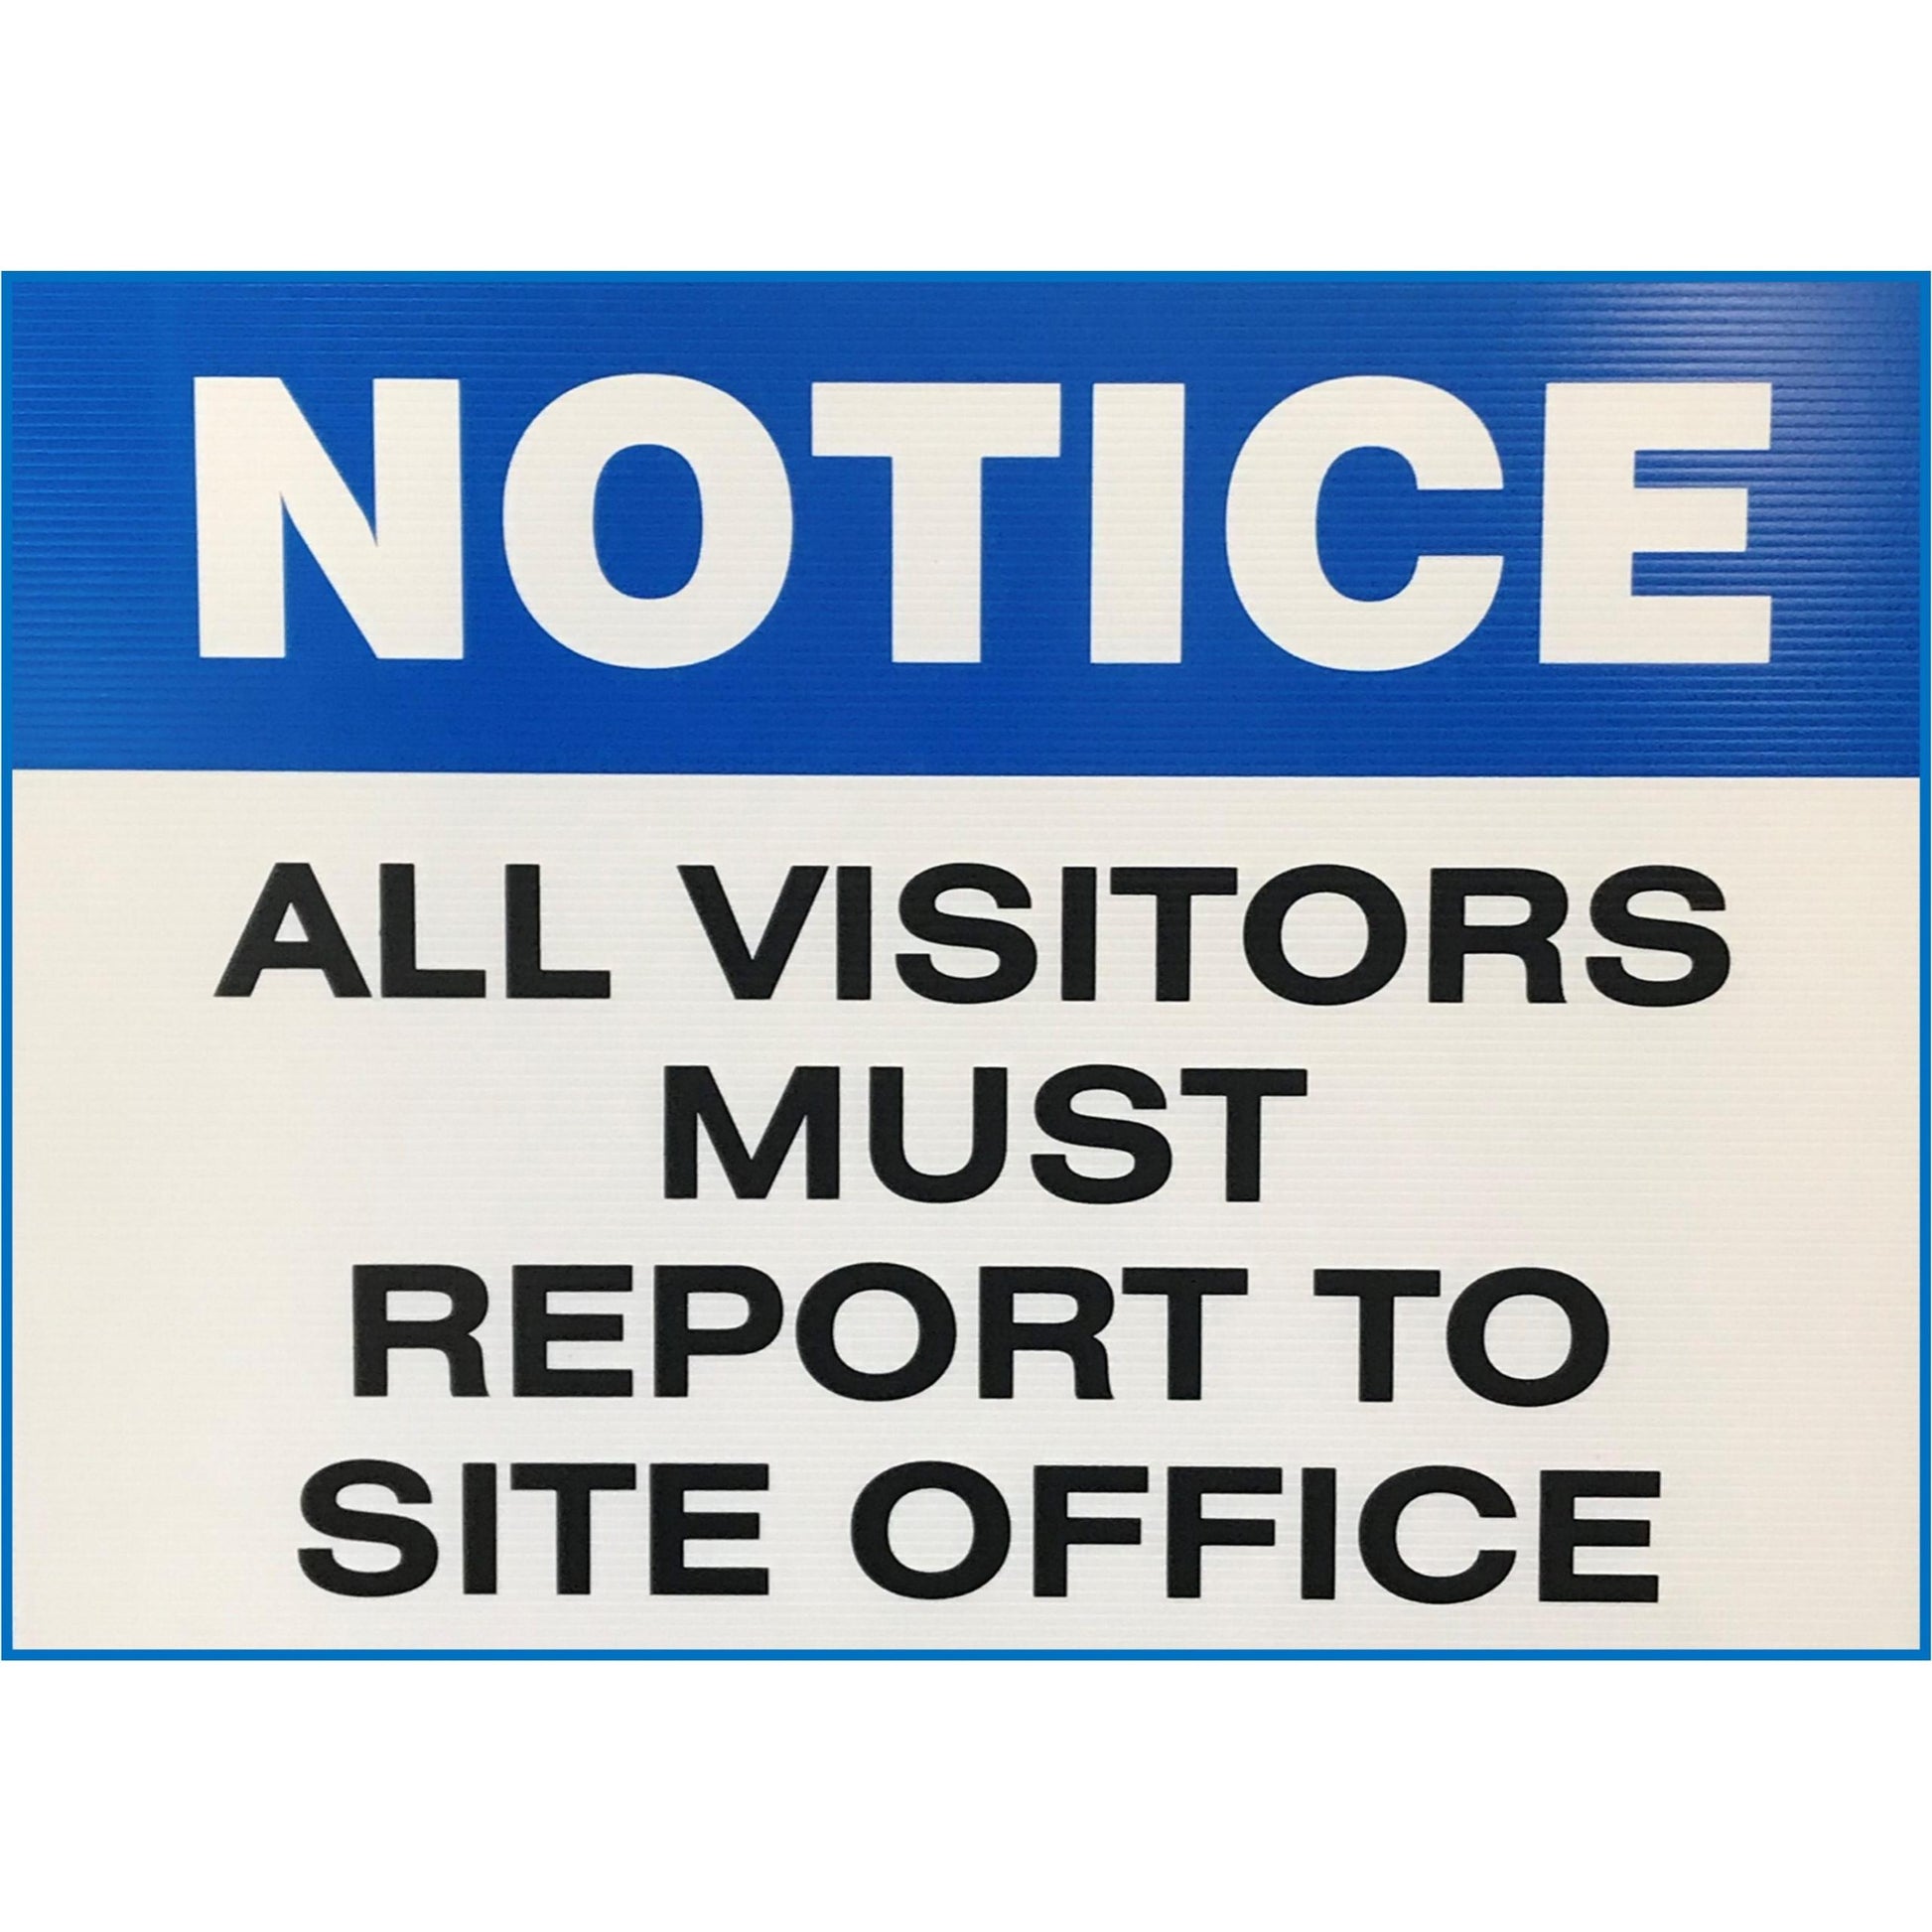 Visitors Report to Site Office Sign